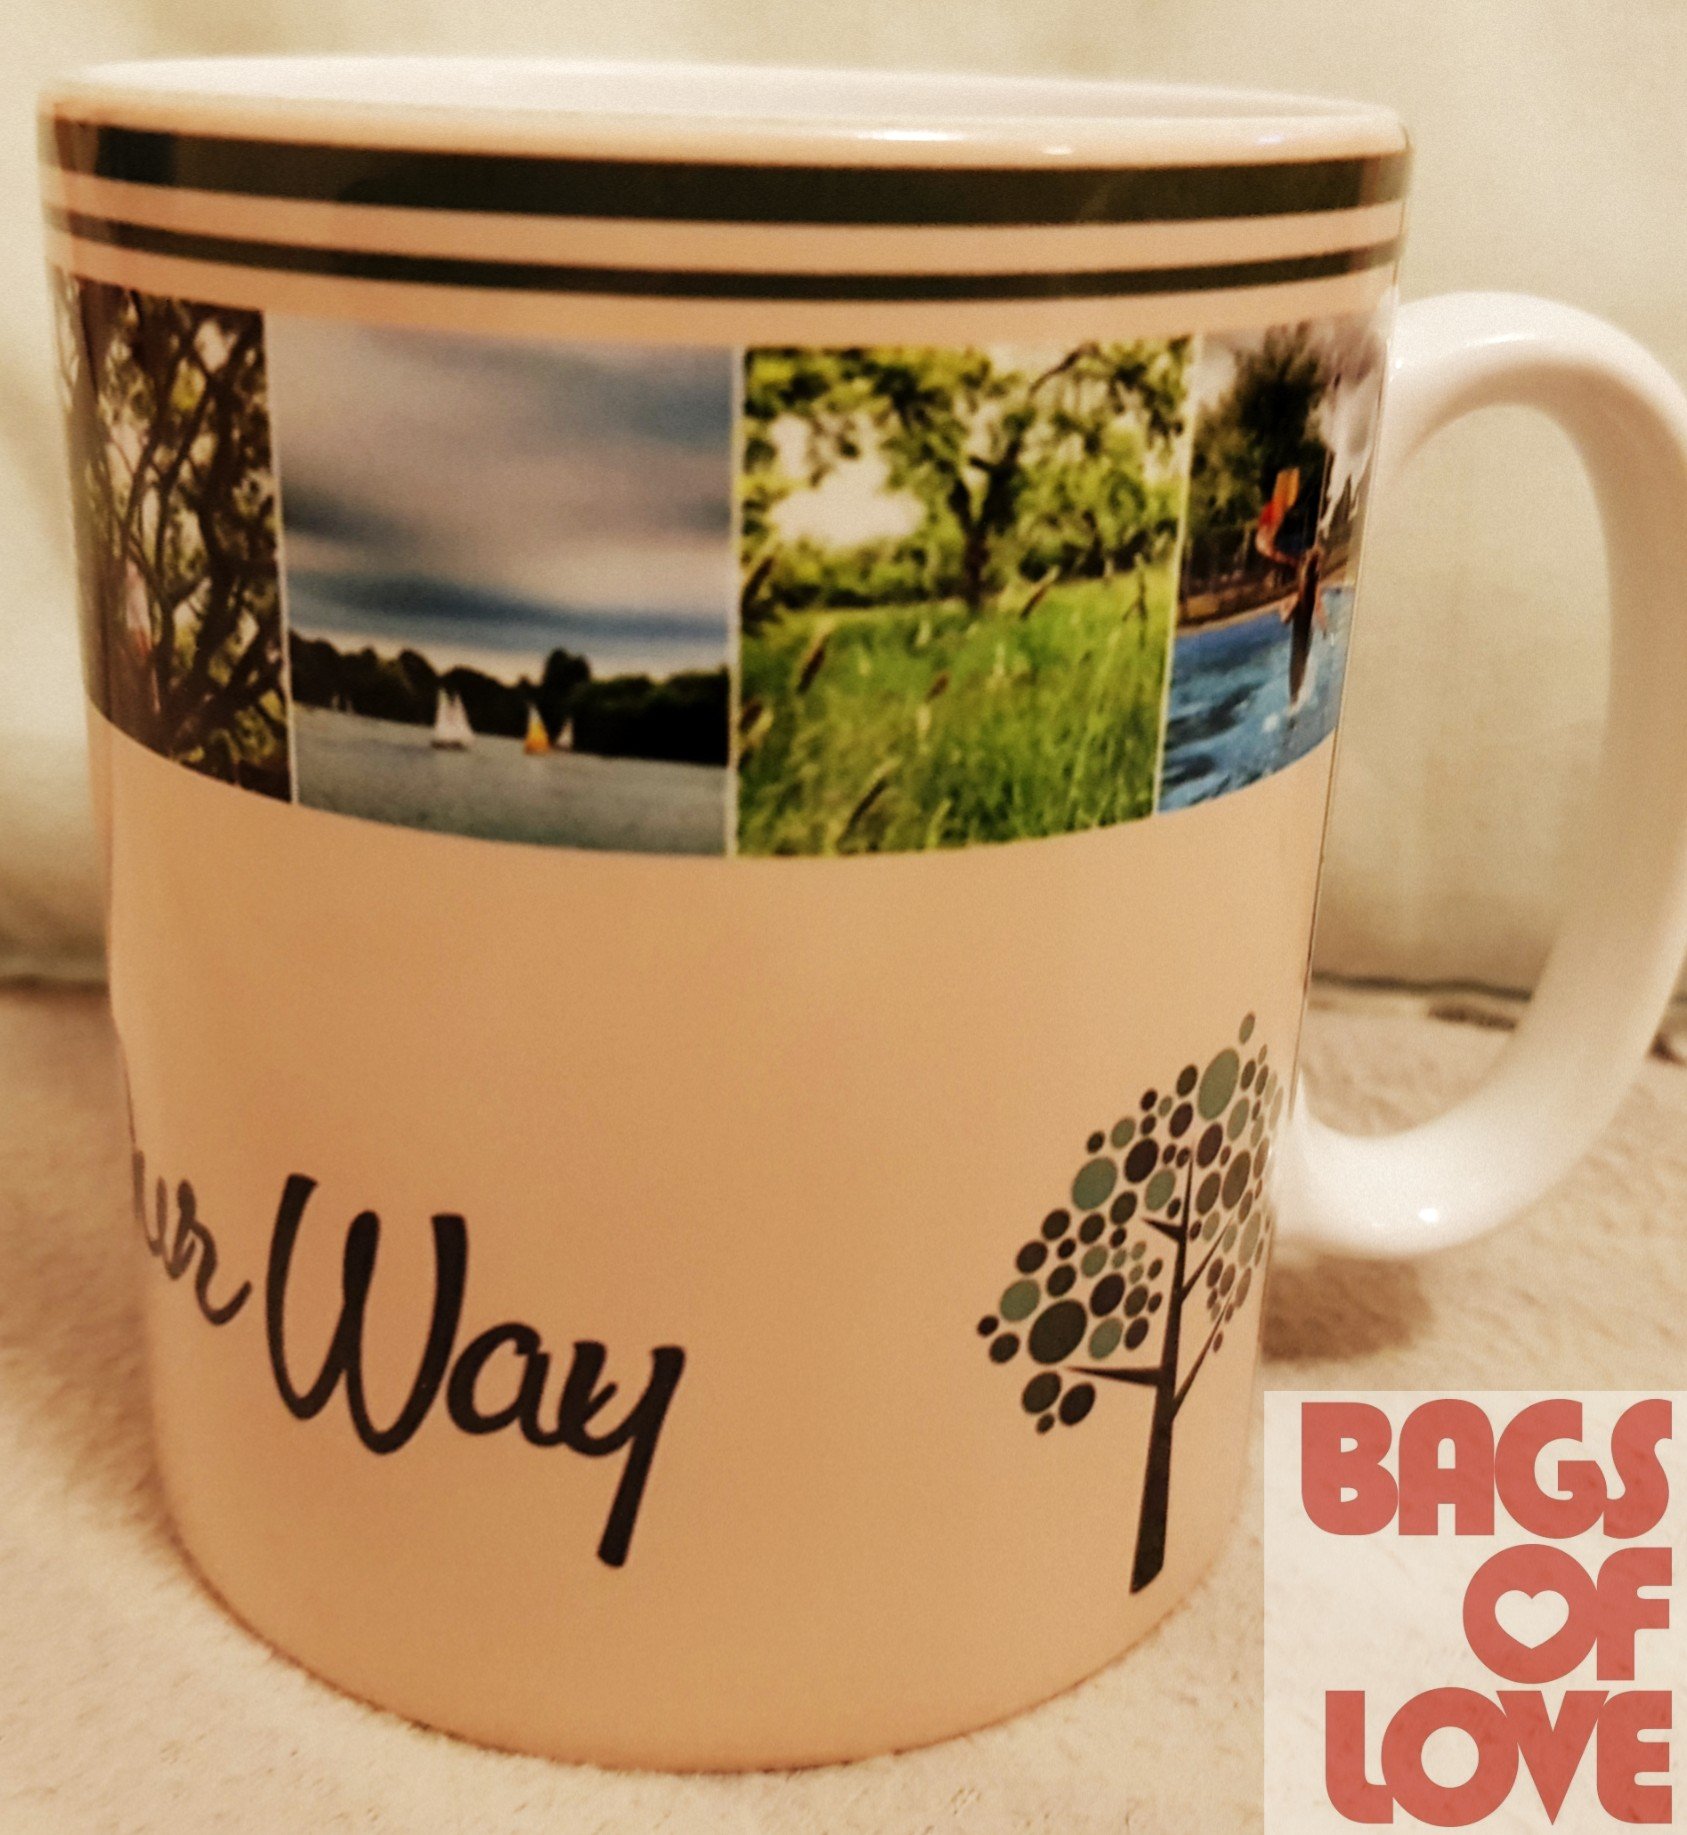 Living Life Our Way personalised photo mug with Bags of Love logo in right hand corner of image.